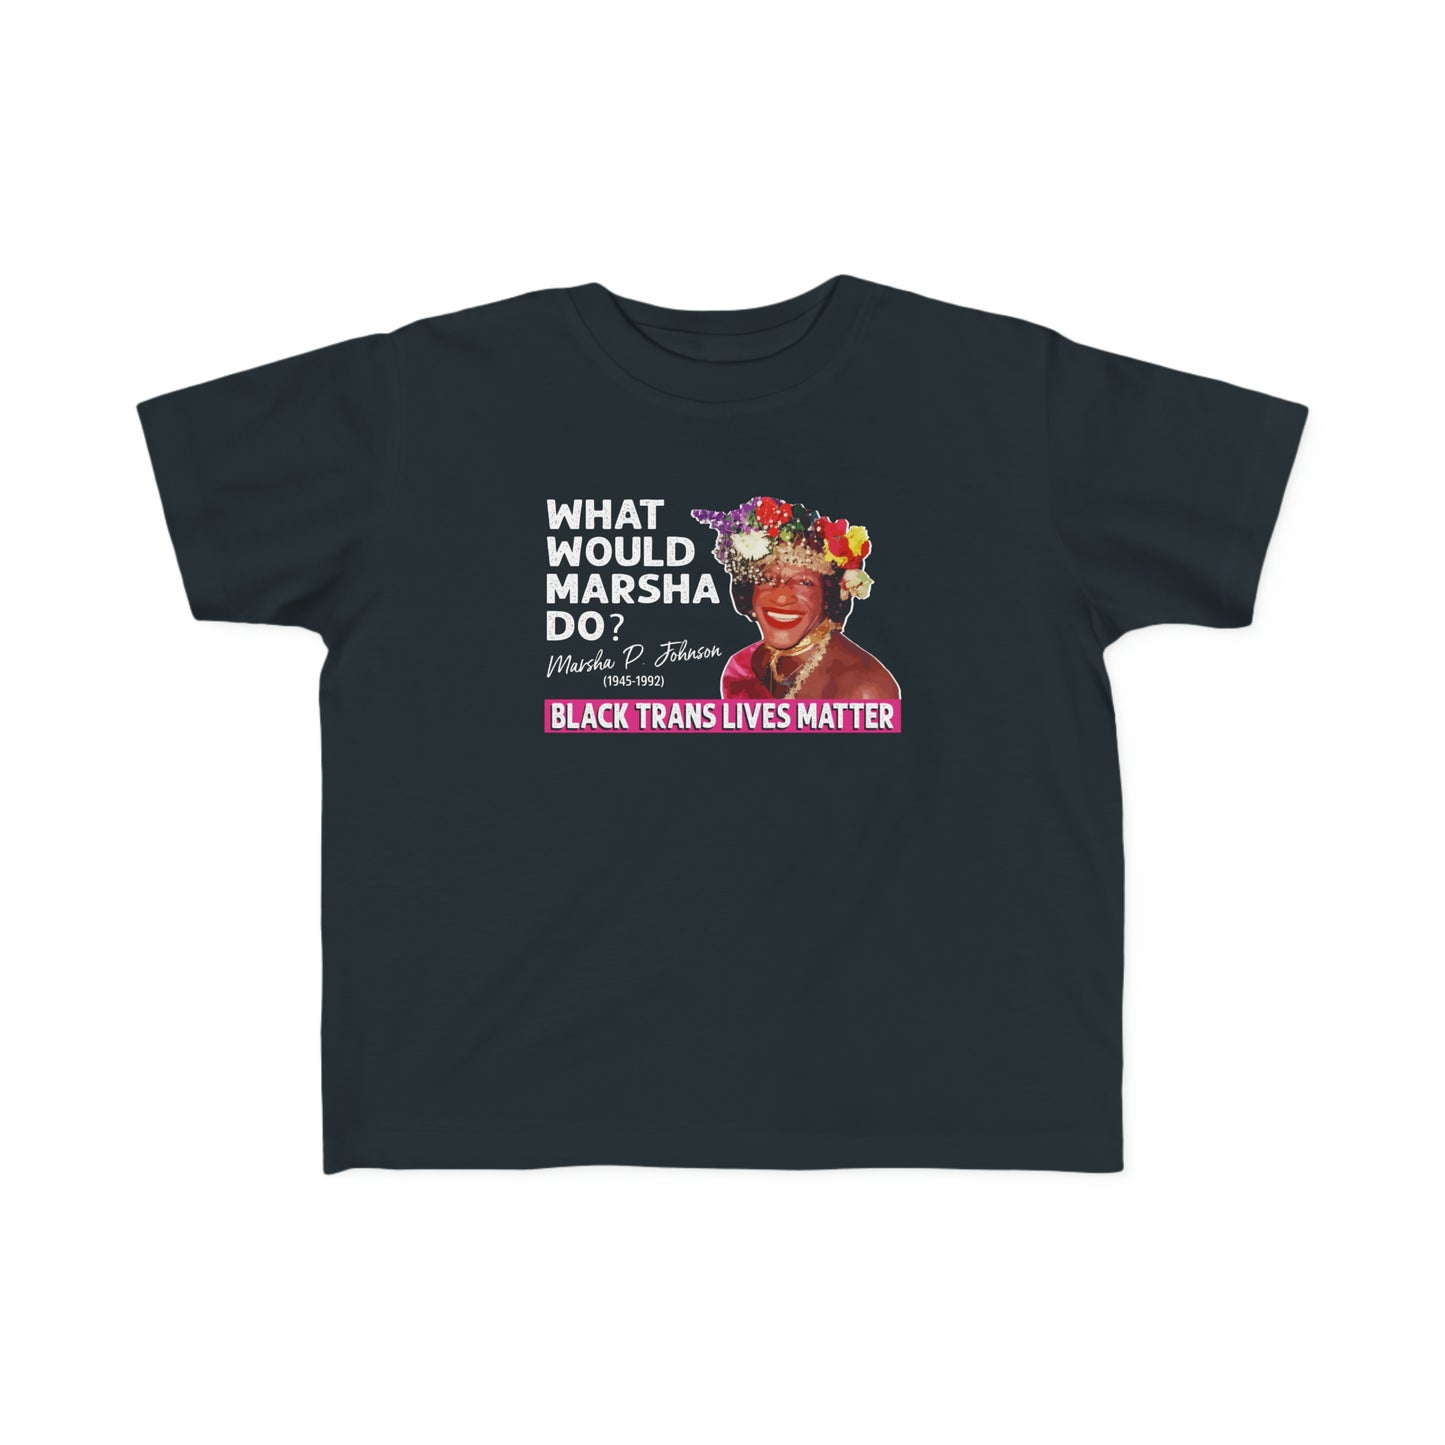 “What Would Marsha Do?” Toddler's Tee